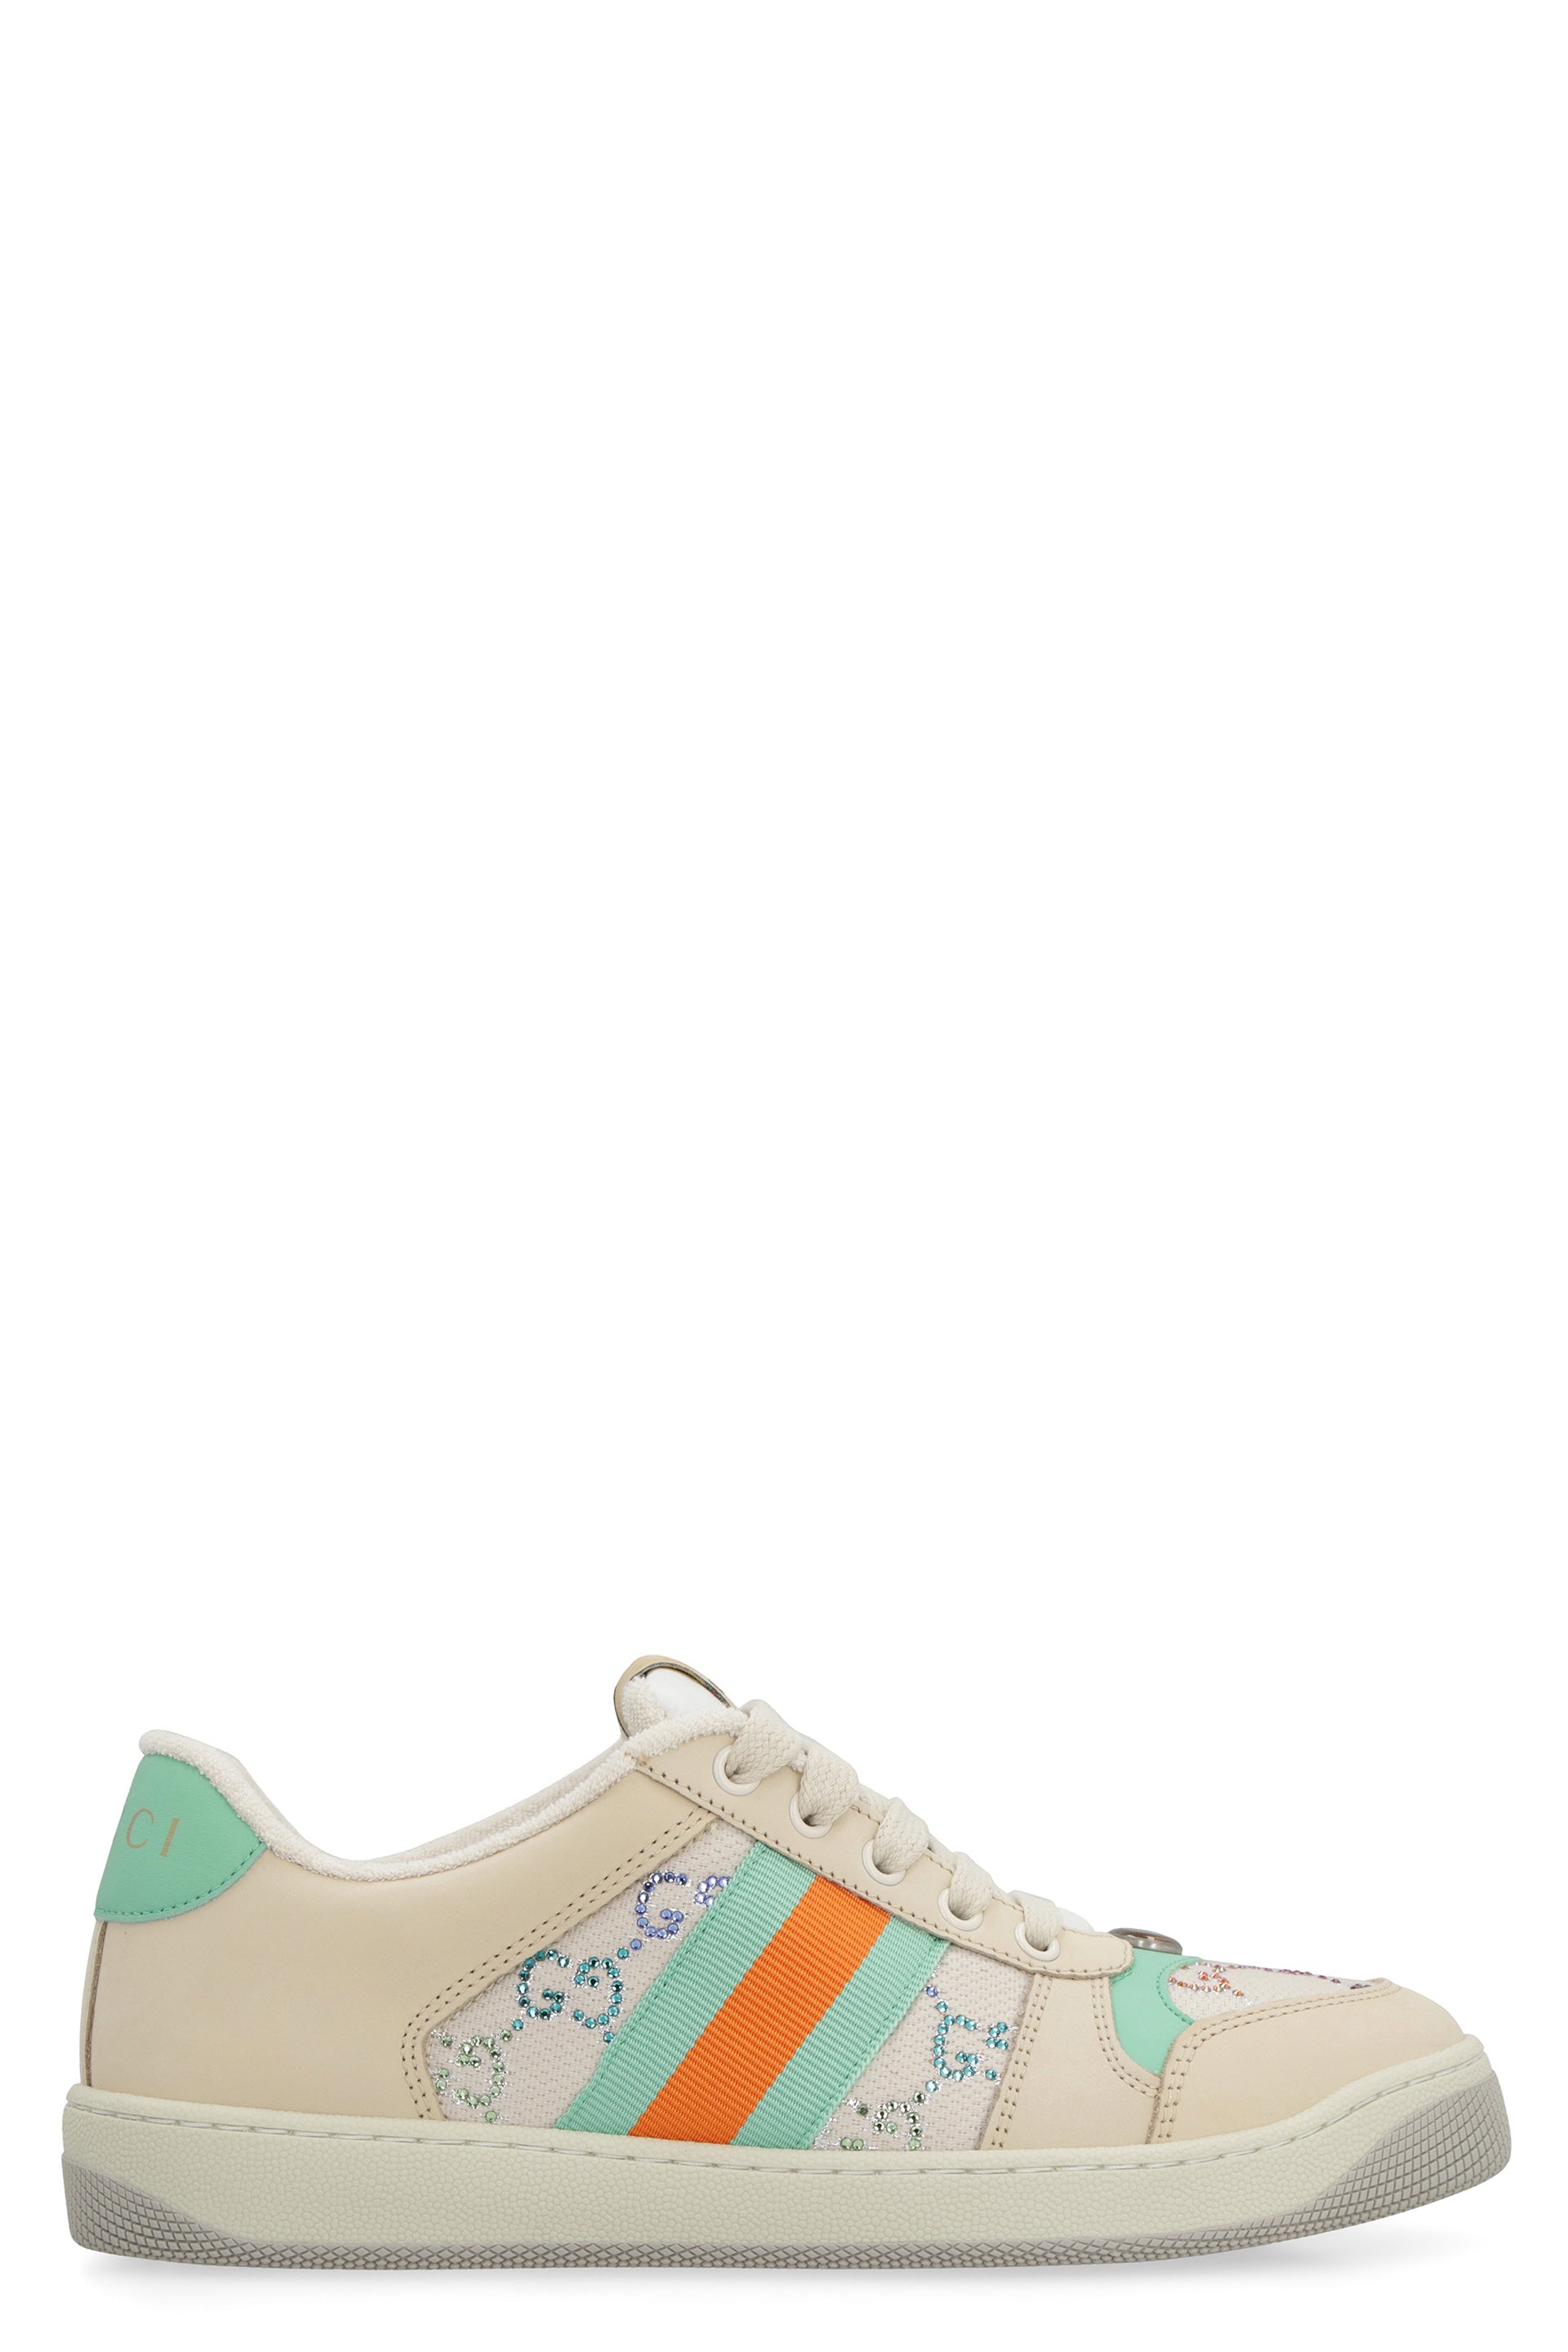 Gucci Sparkling Silver Sneakers For Women